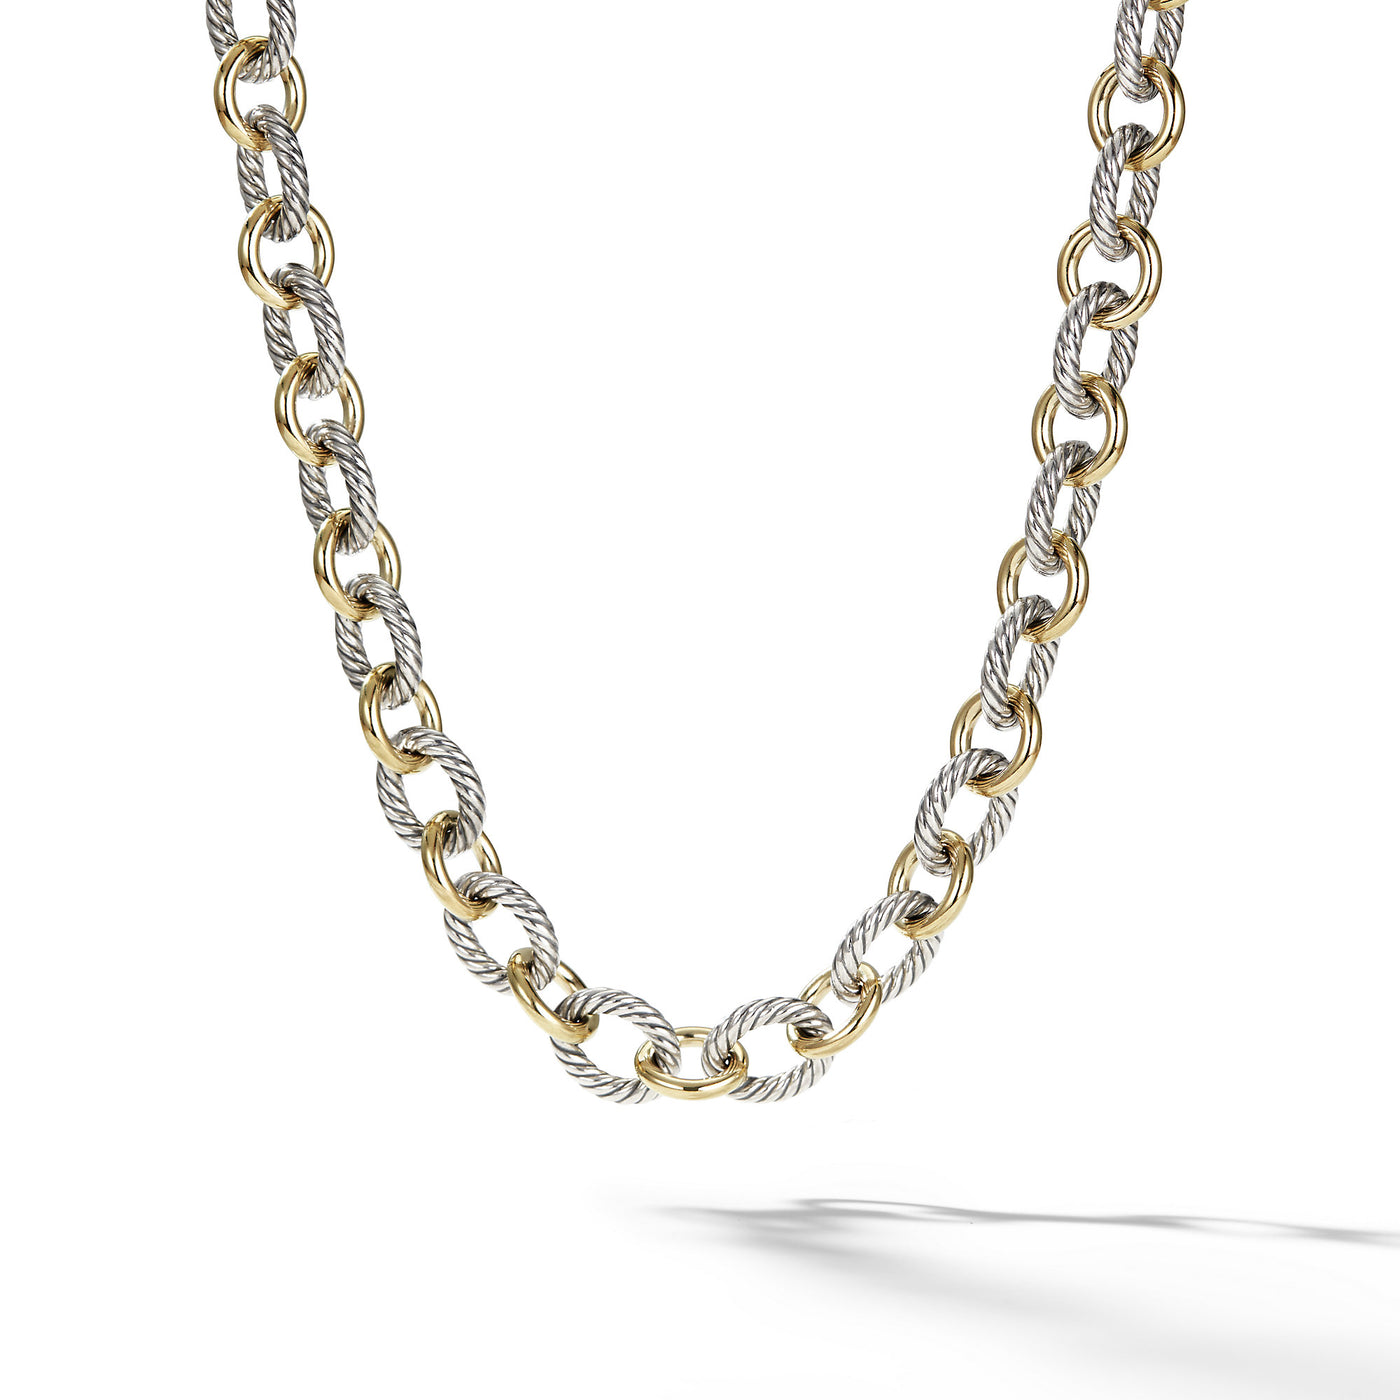 Oval Link Chain Necklace in Sterling Silver with 18K Yellow Gold\, 16mm